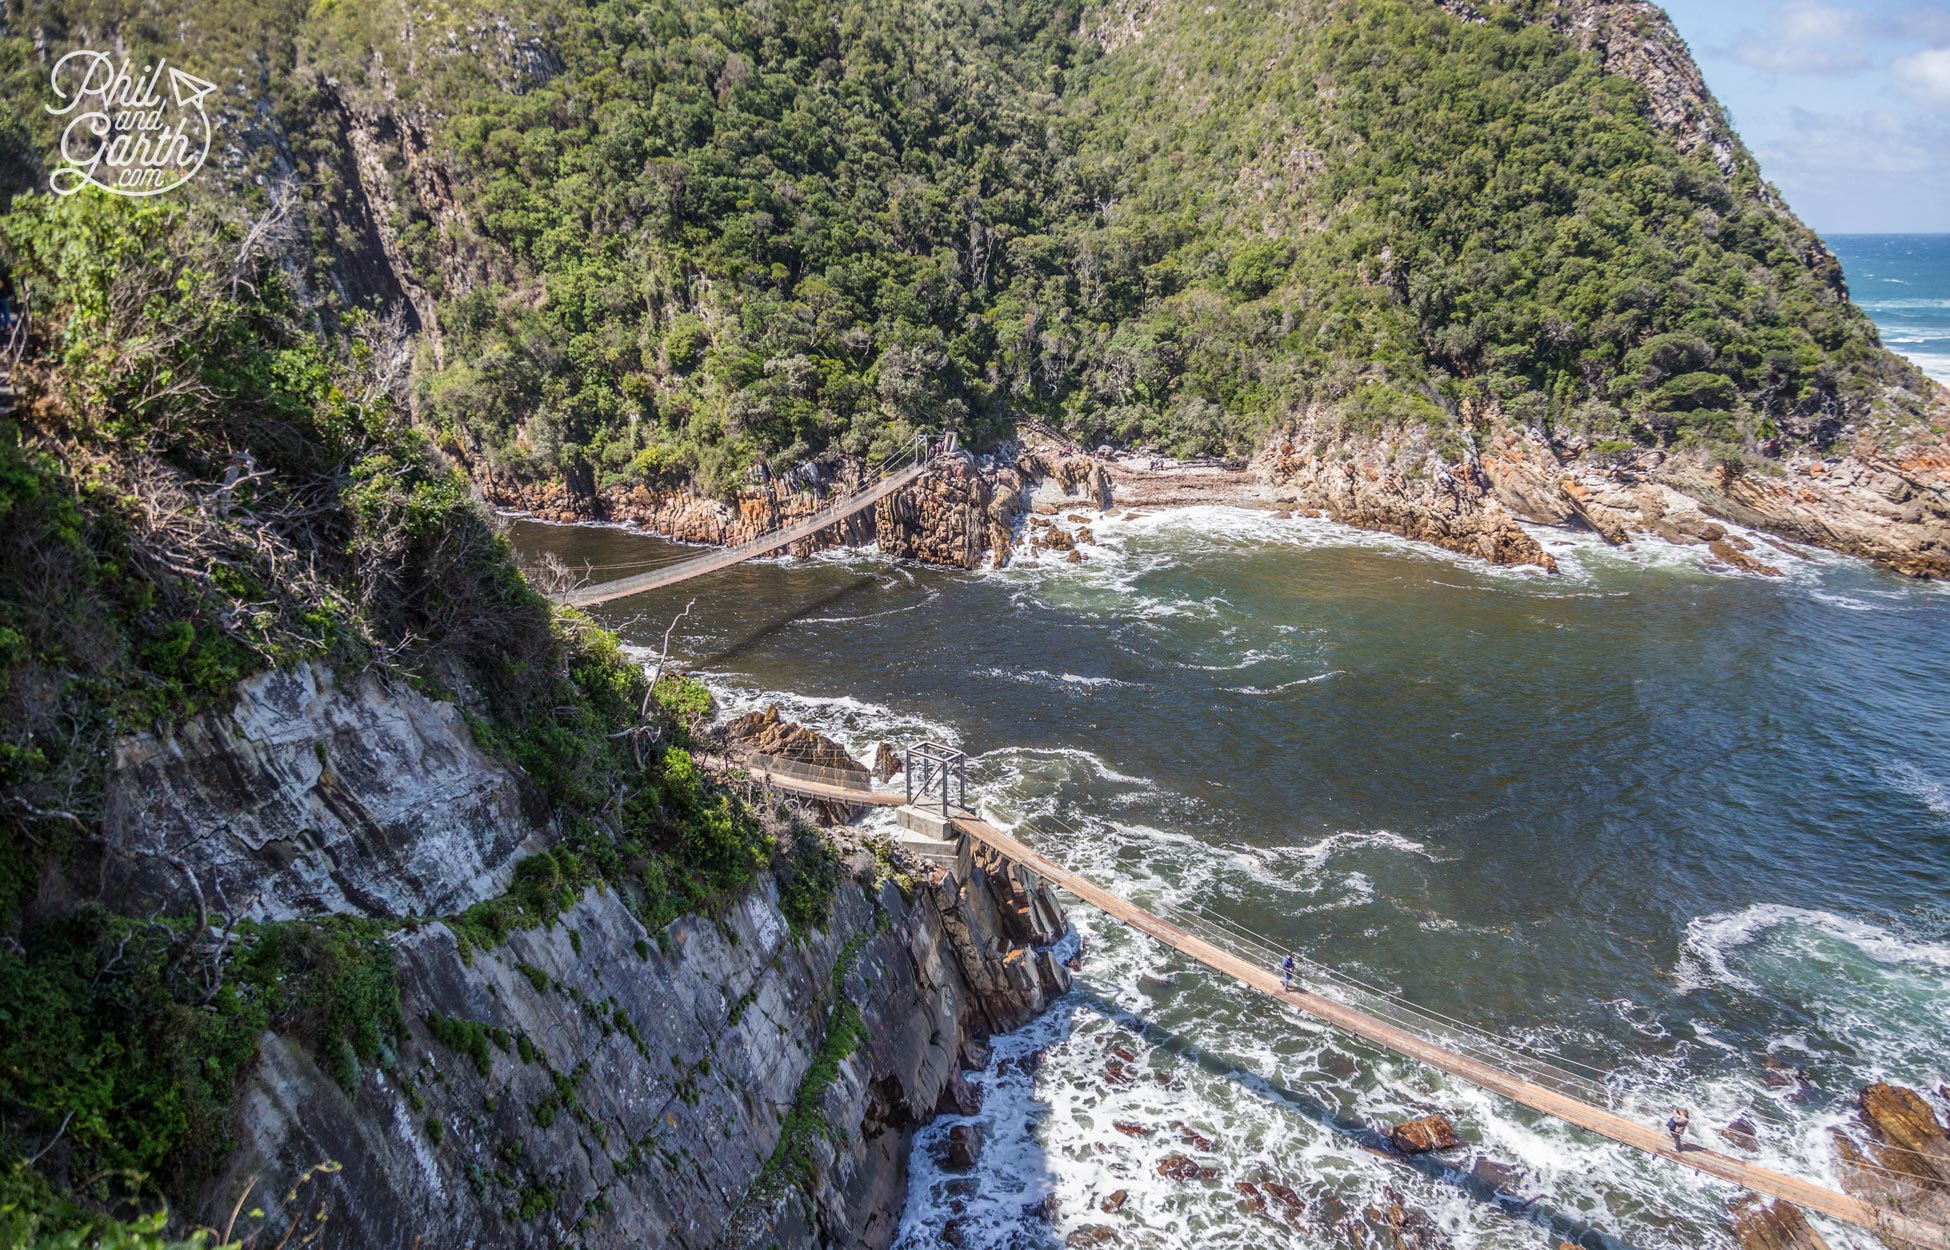 Suspension bridges across the Storms River - the first one was built in 1969